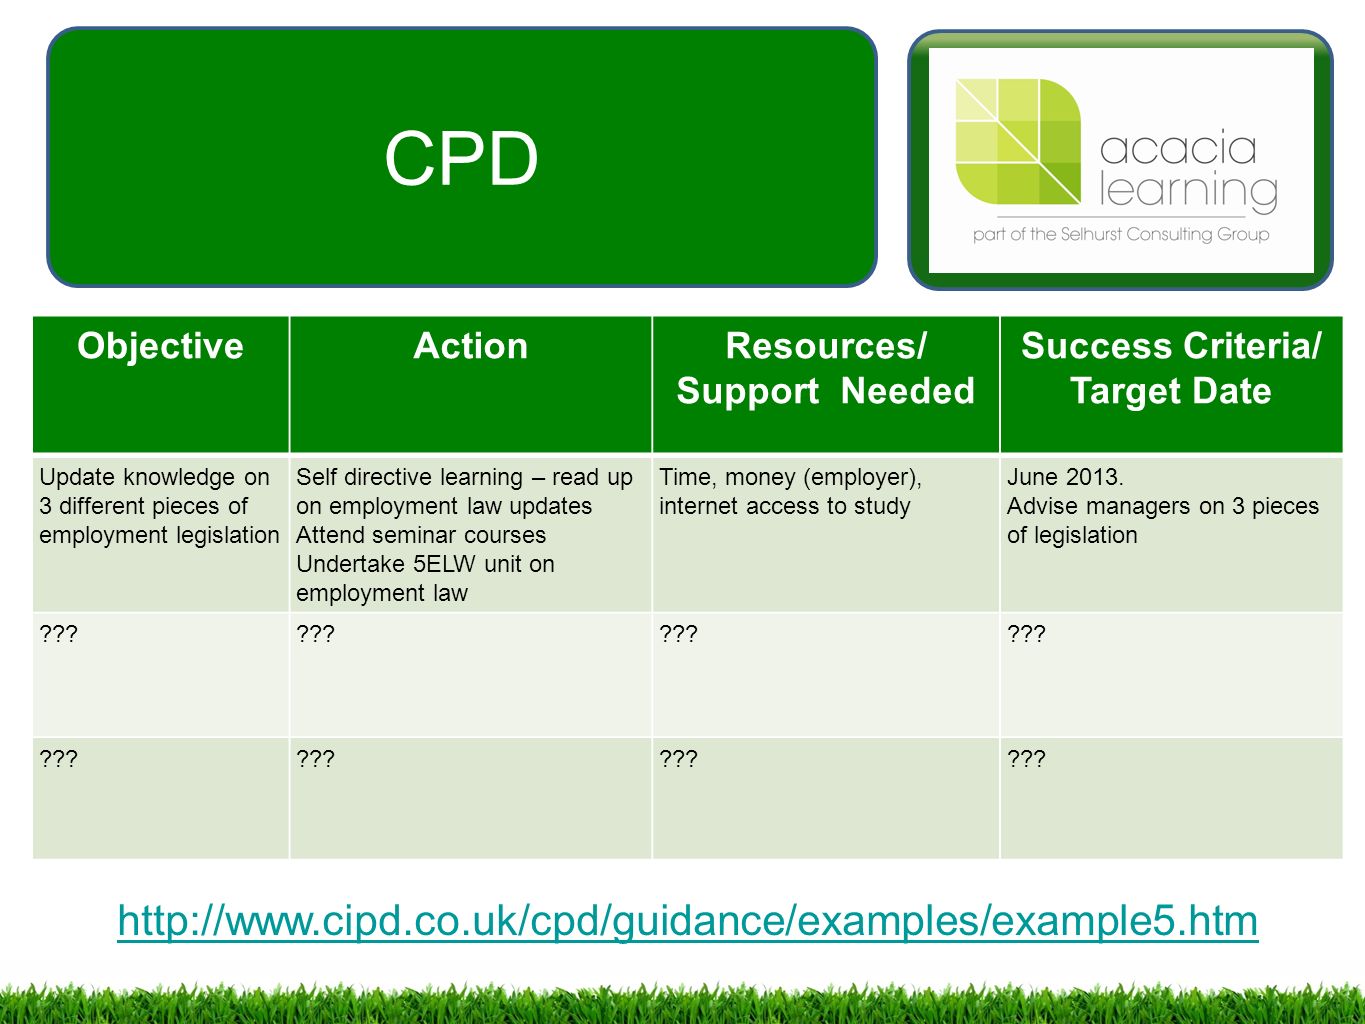 cipd cpd